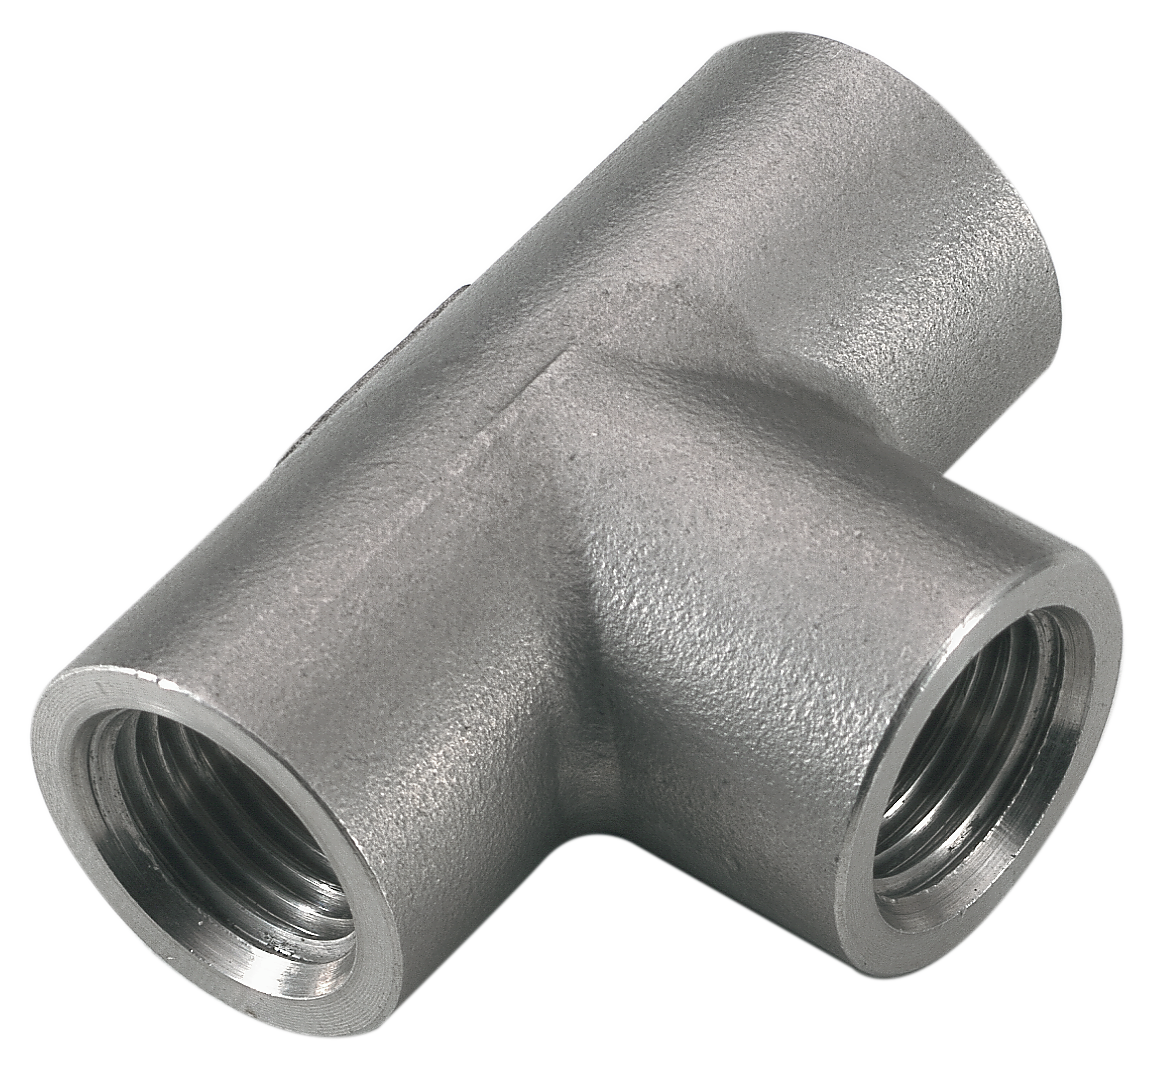 T equal female cylindrical stainless steel AISI 316Ti Standard fittings in stainless steel